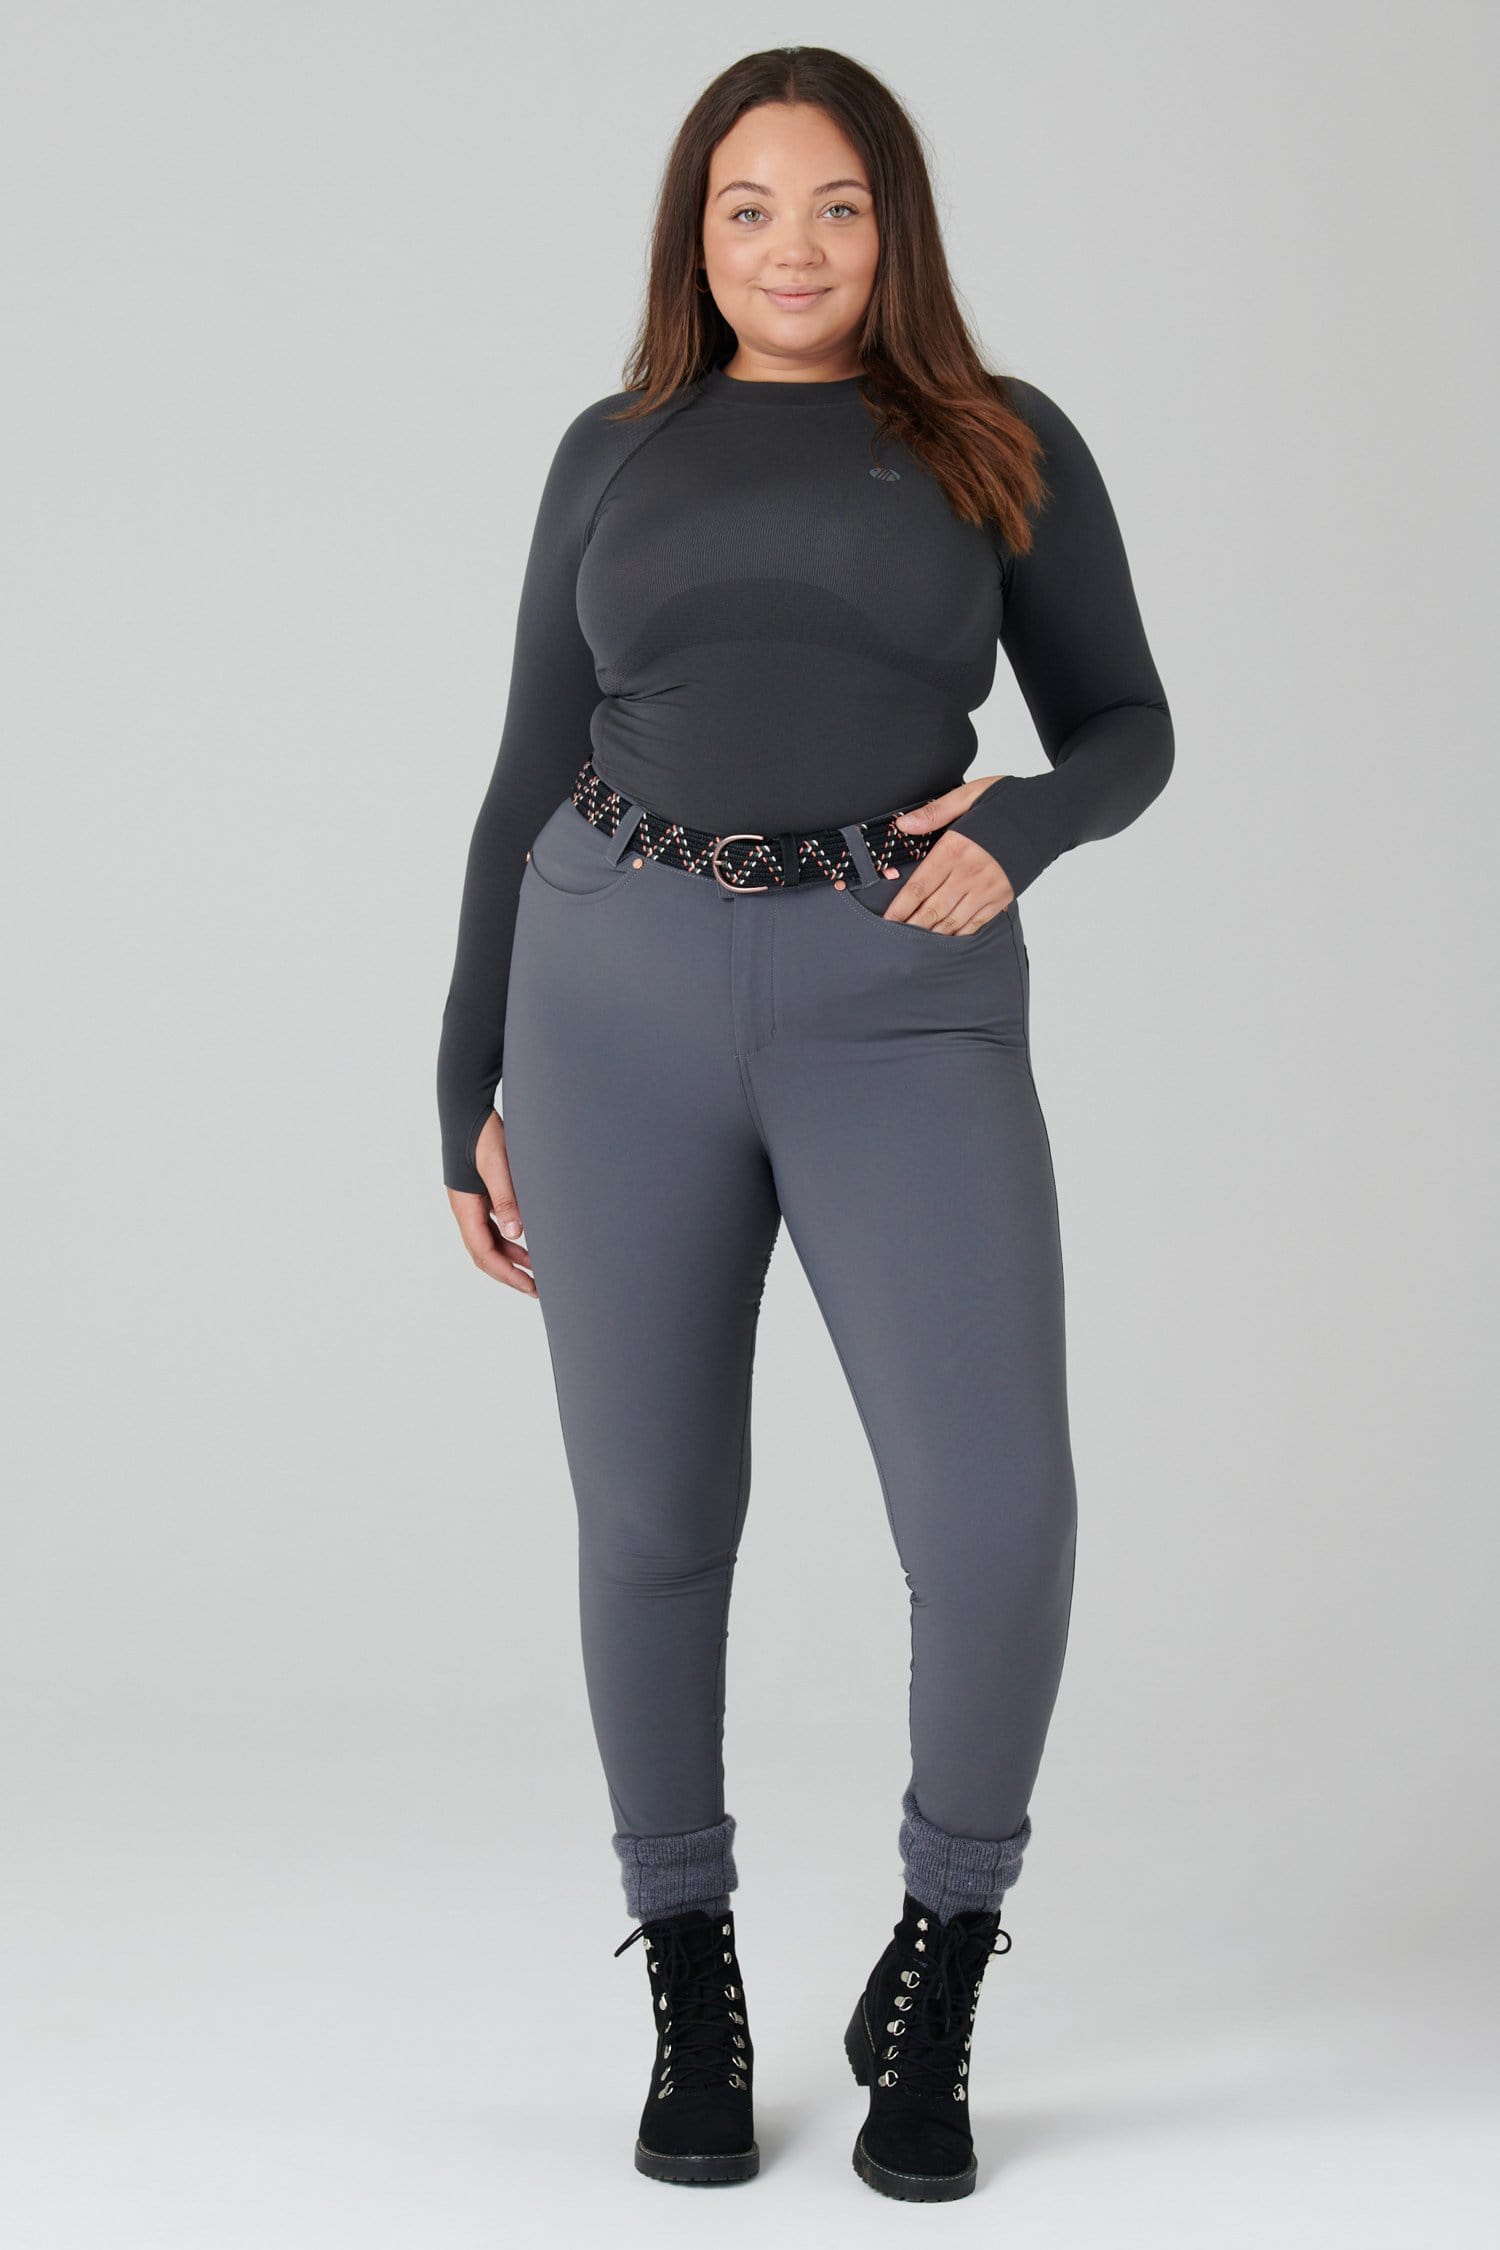 ACAI MAX Stretch Skinny Outdoor Trousers – Review – Abelia's Corner